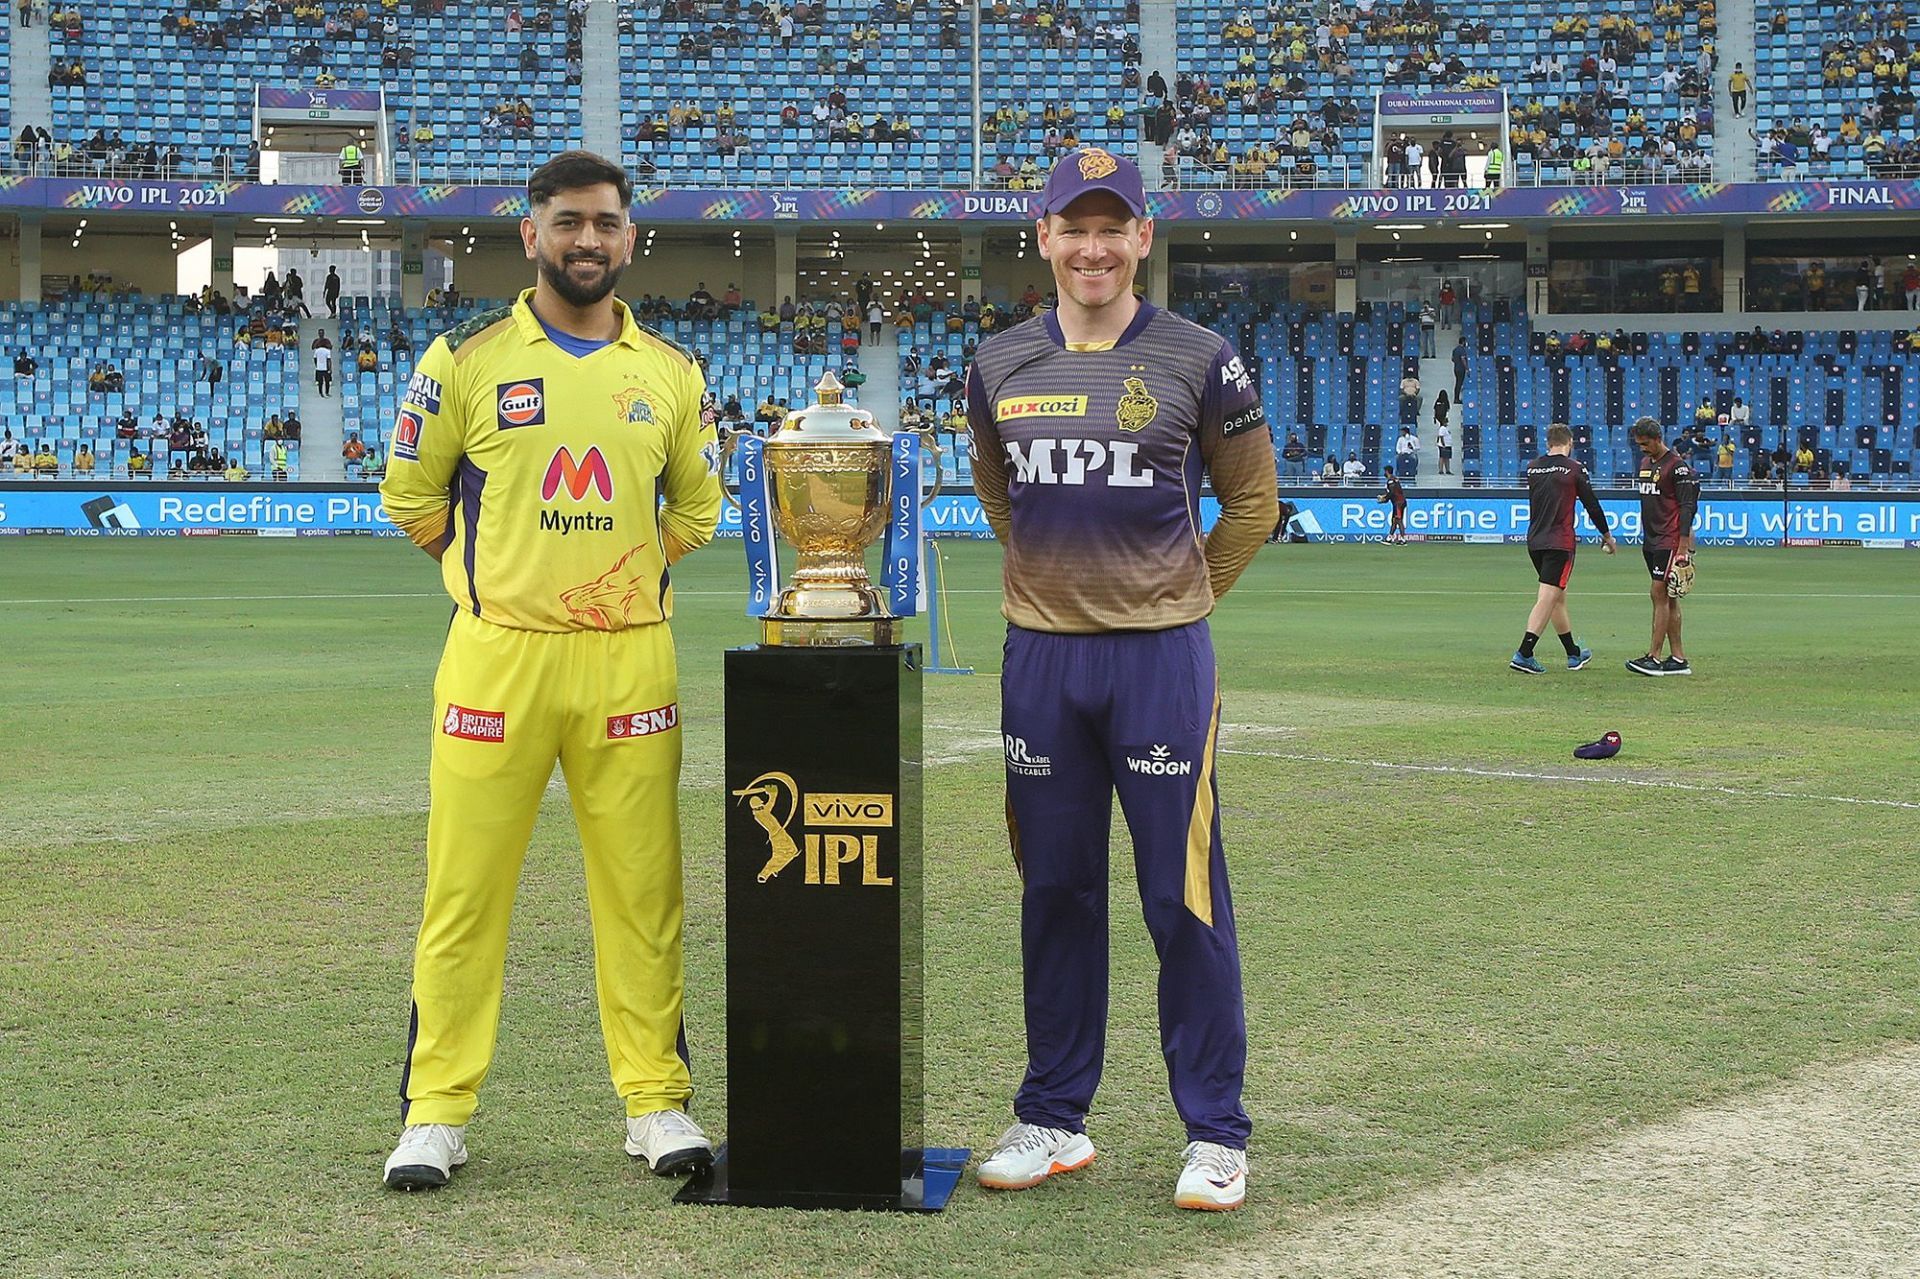 Chennai Super Kings and Kolkata Knight Riders are among the teams to feature on this list (Image Courtesy: IPLT20.com)